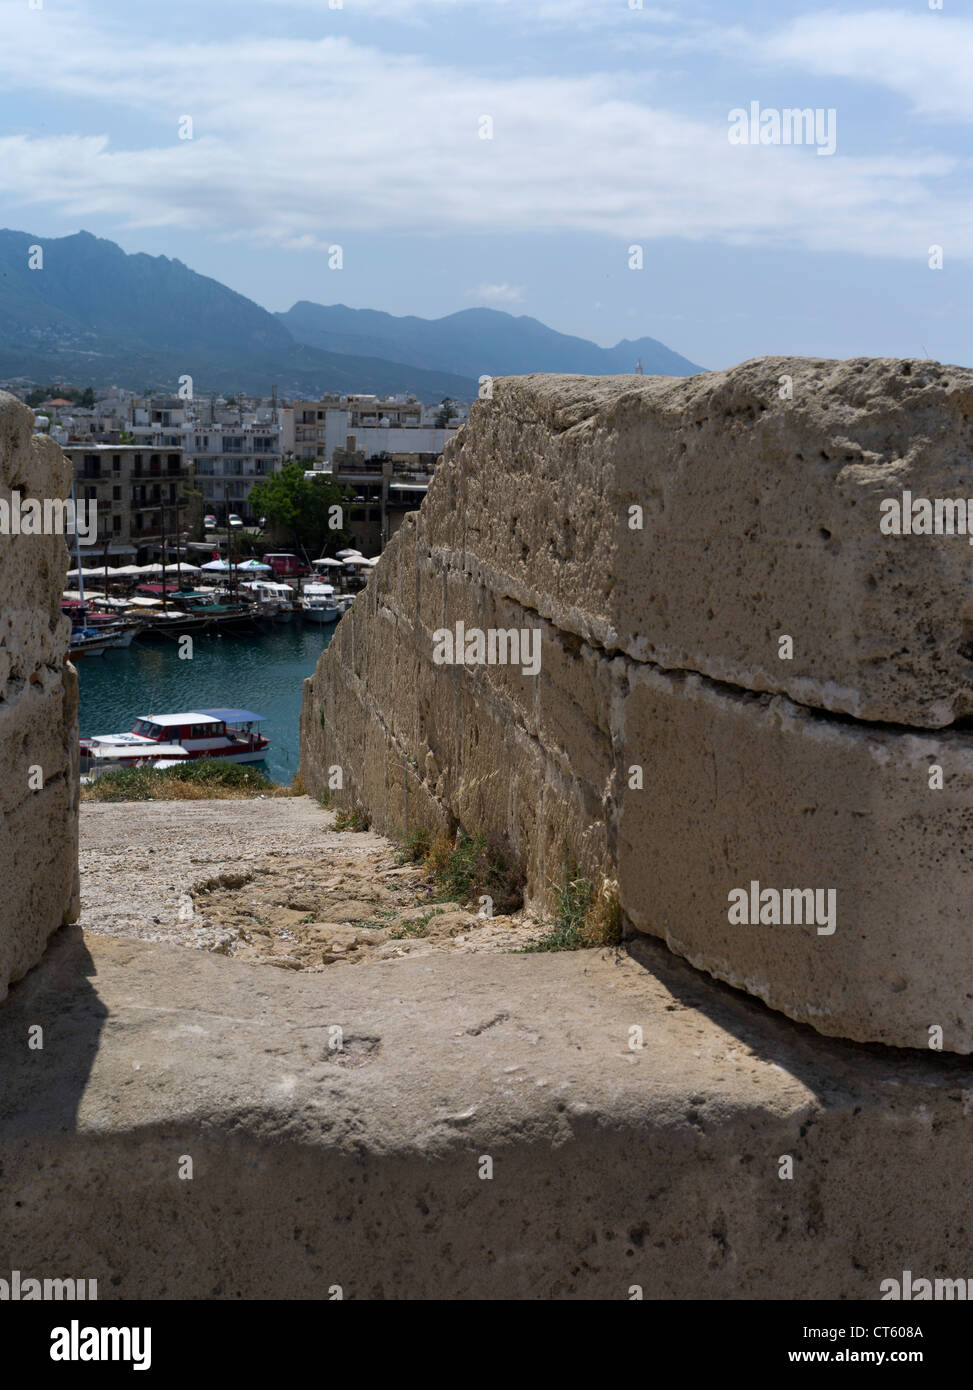 dh Girne Castle KYRENIA NORTHERN CYPRUS Venetian castle walls old harbour and Besparmak mountains Stock Photo